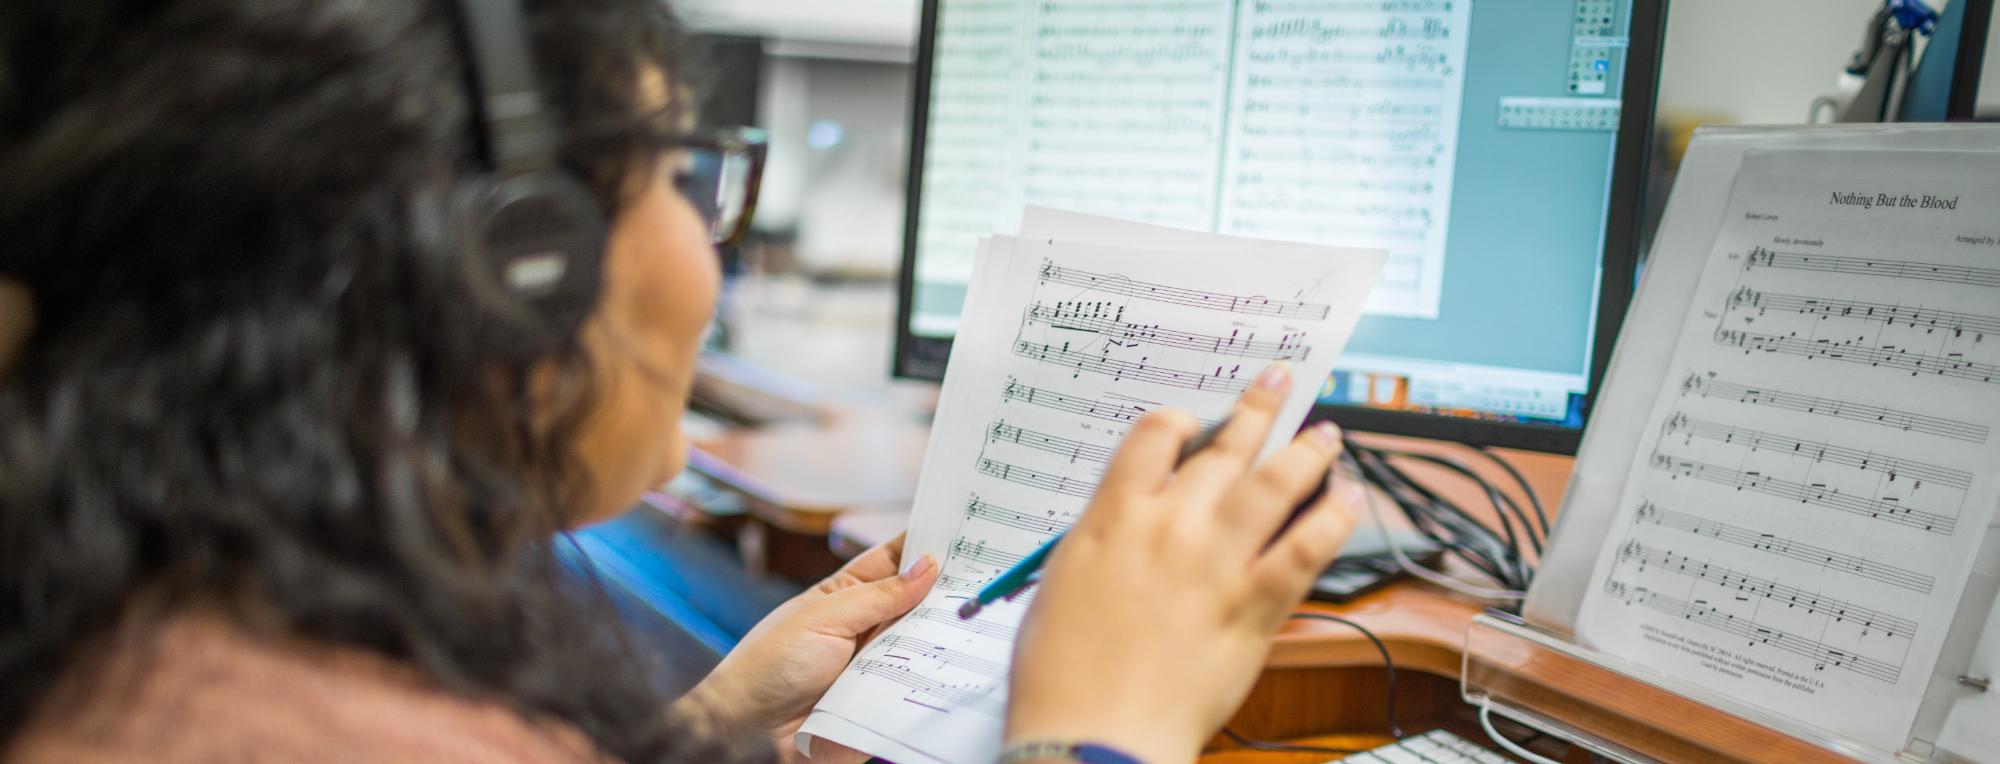 A student works on composing music at her computer